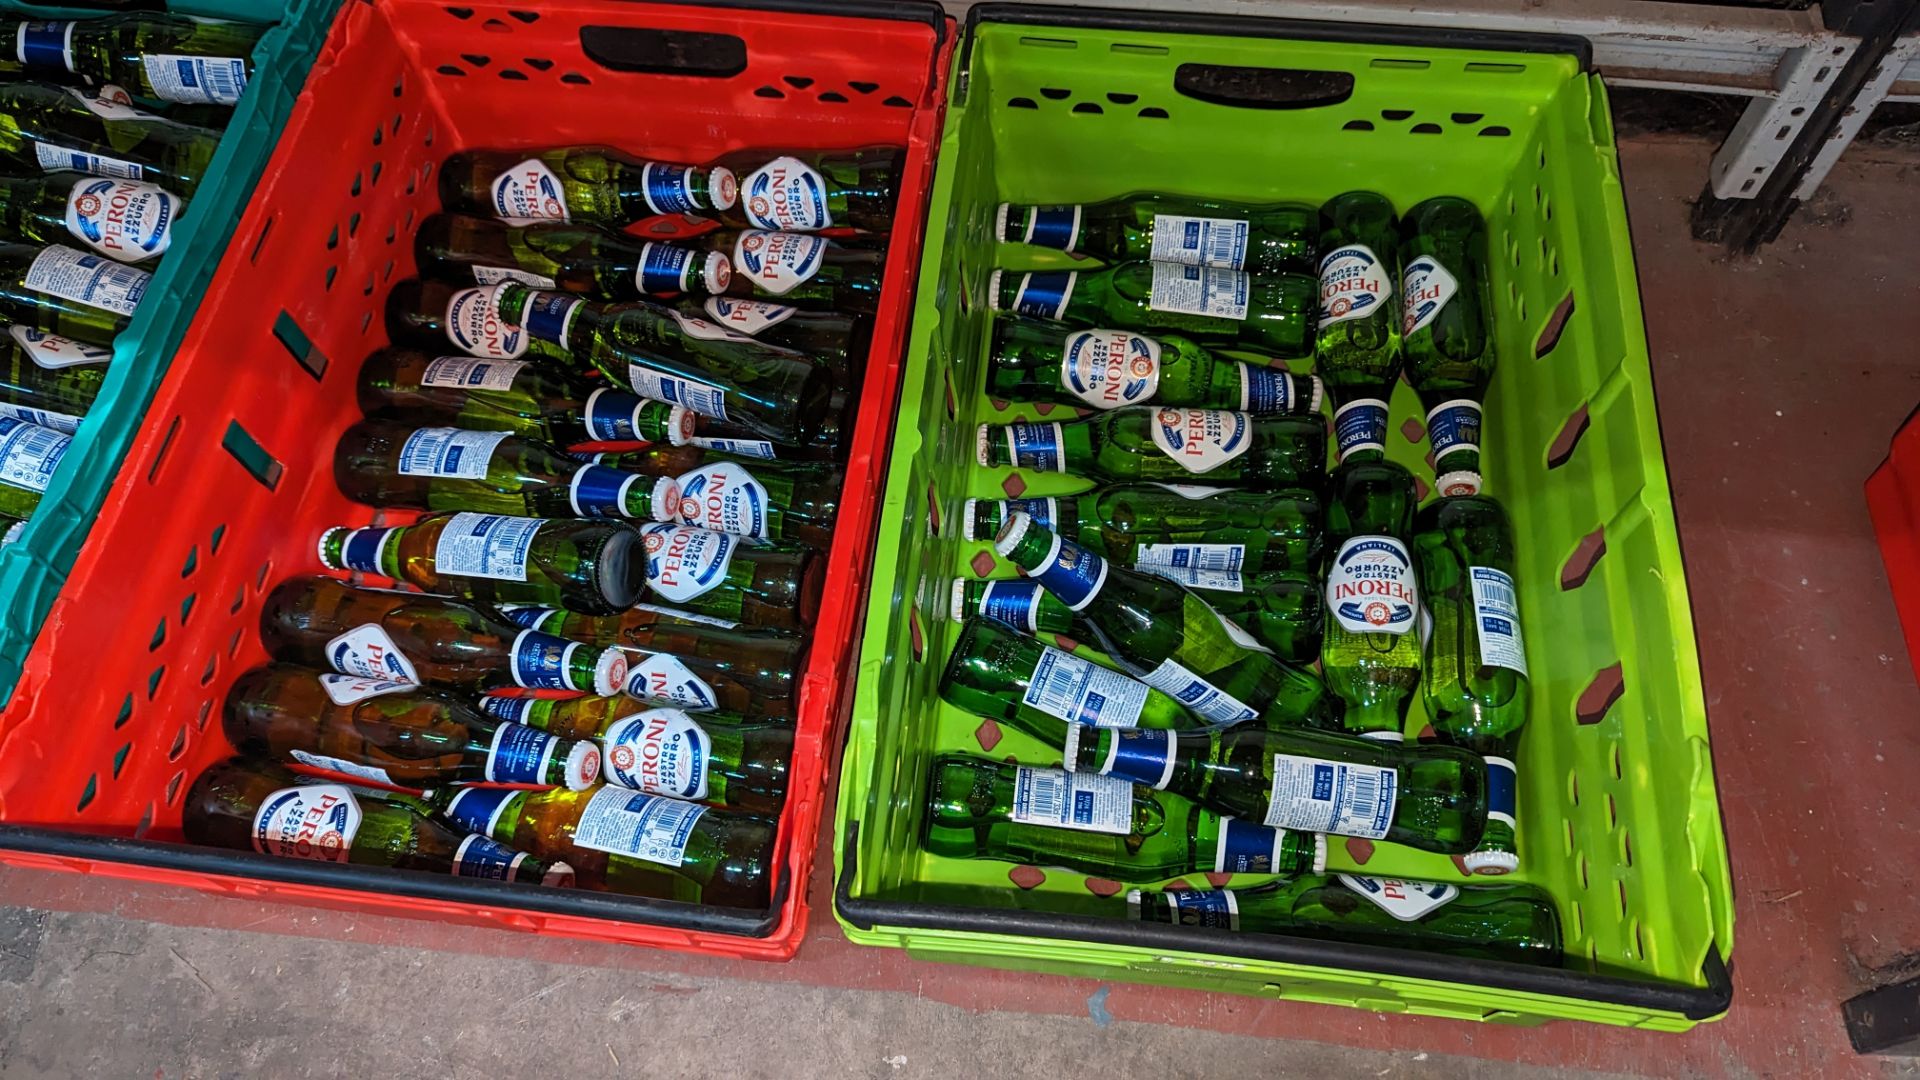 68 bottles of Peroni Nastro Azzurro beer (in 3 crates) sold under AWRS number XQAW00000101017 - Image 3 of 6